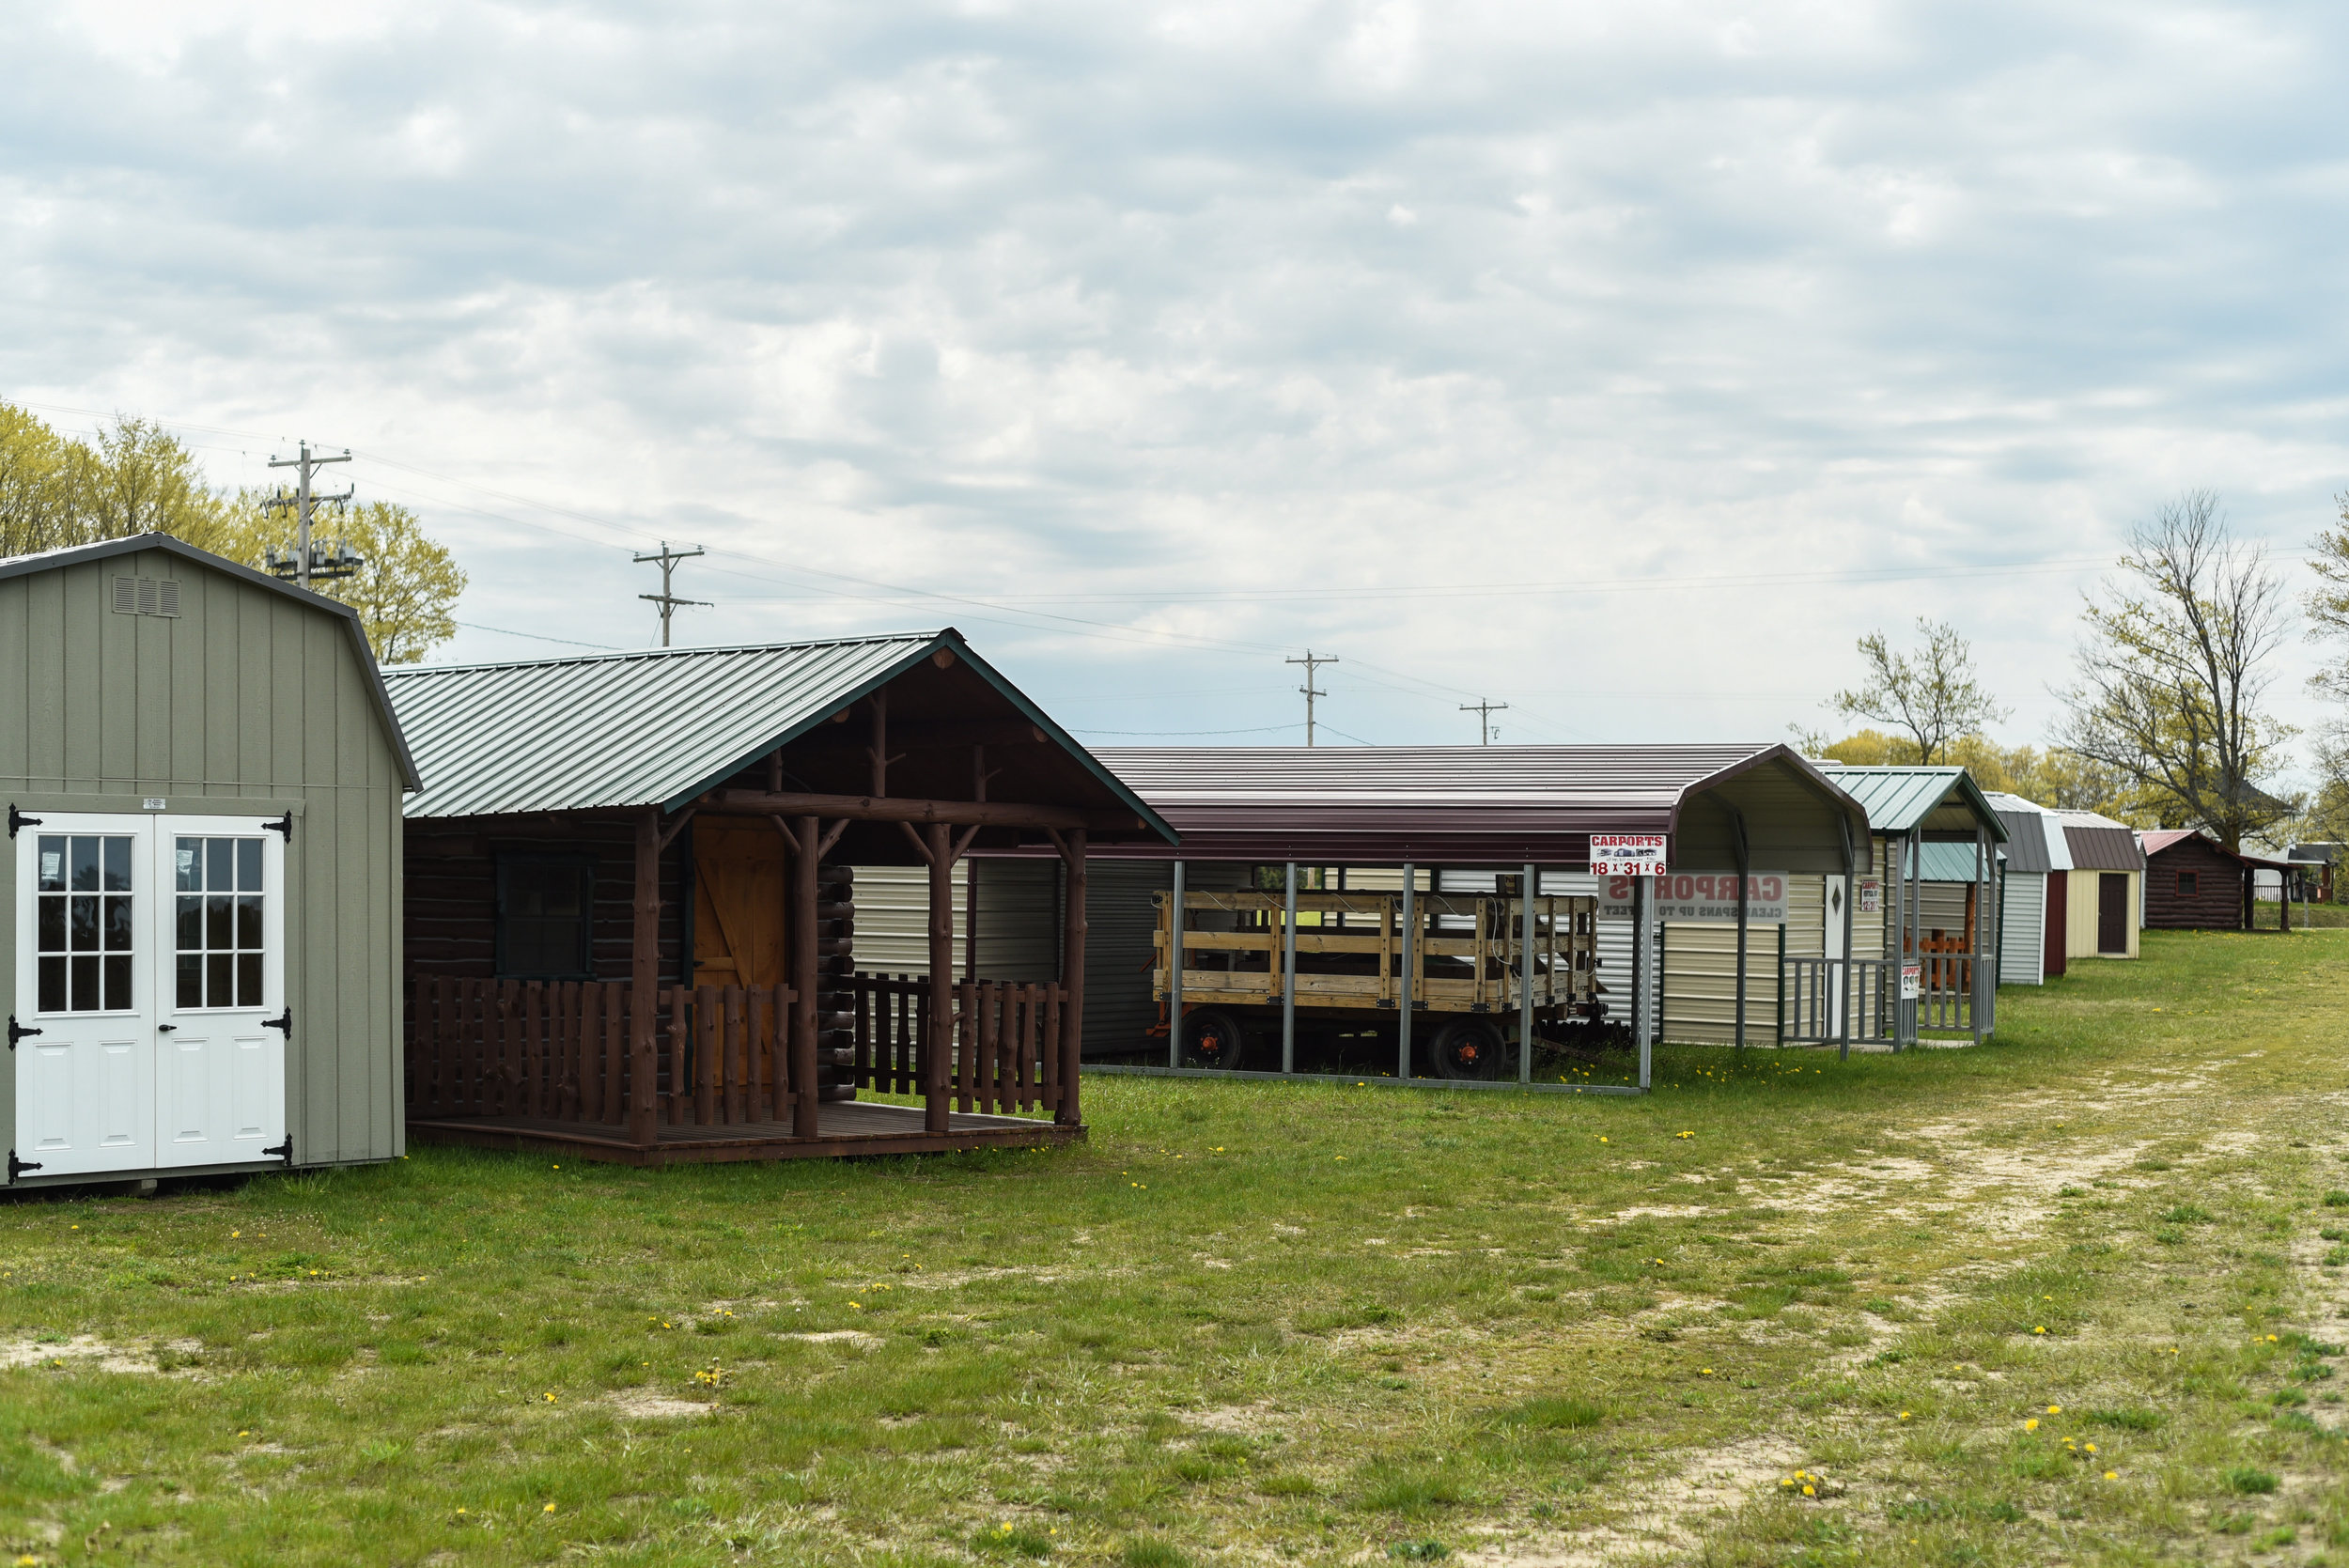  Some buildings we have onsite at our Buckley location include small cabins, sheds, carports and garages. 